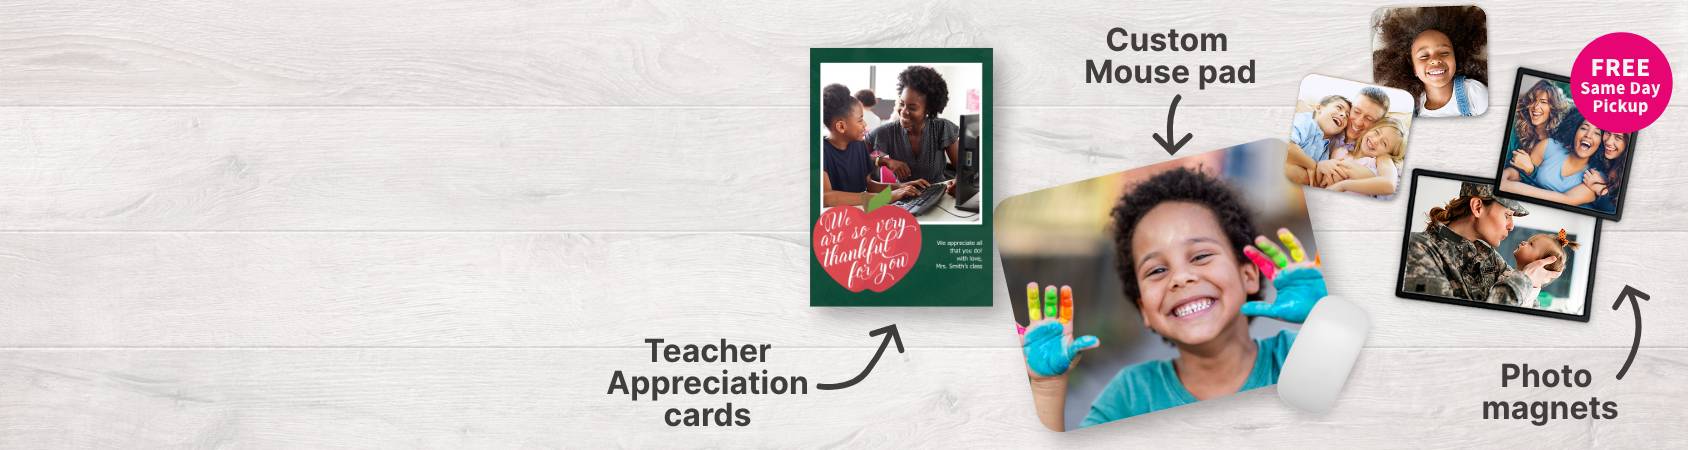 Teacher Appreciation Cards. Photo Magnets. Mouse pads. FREE Same Day Pickup.